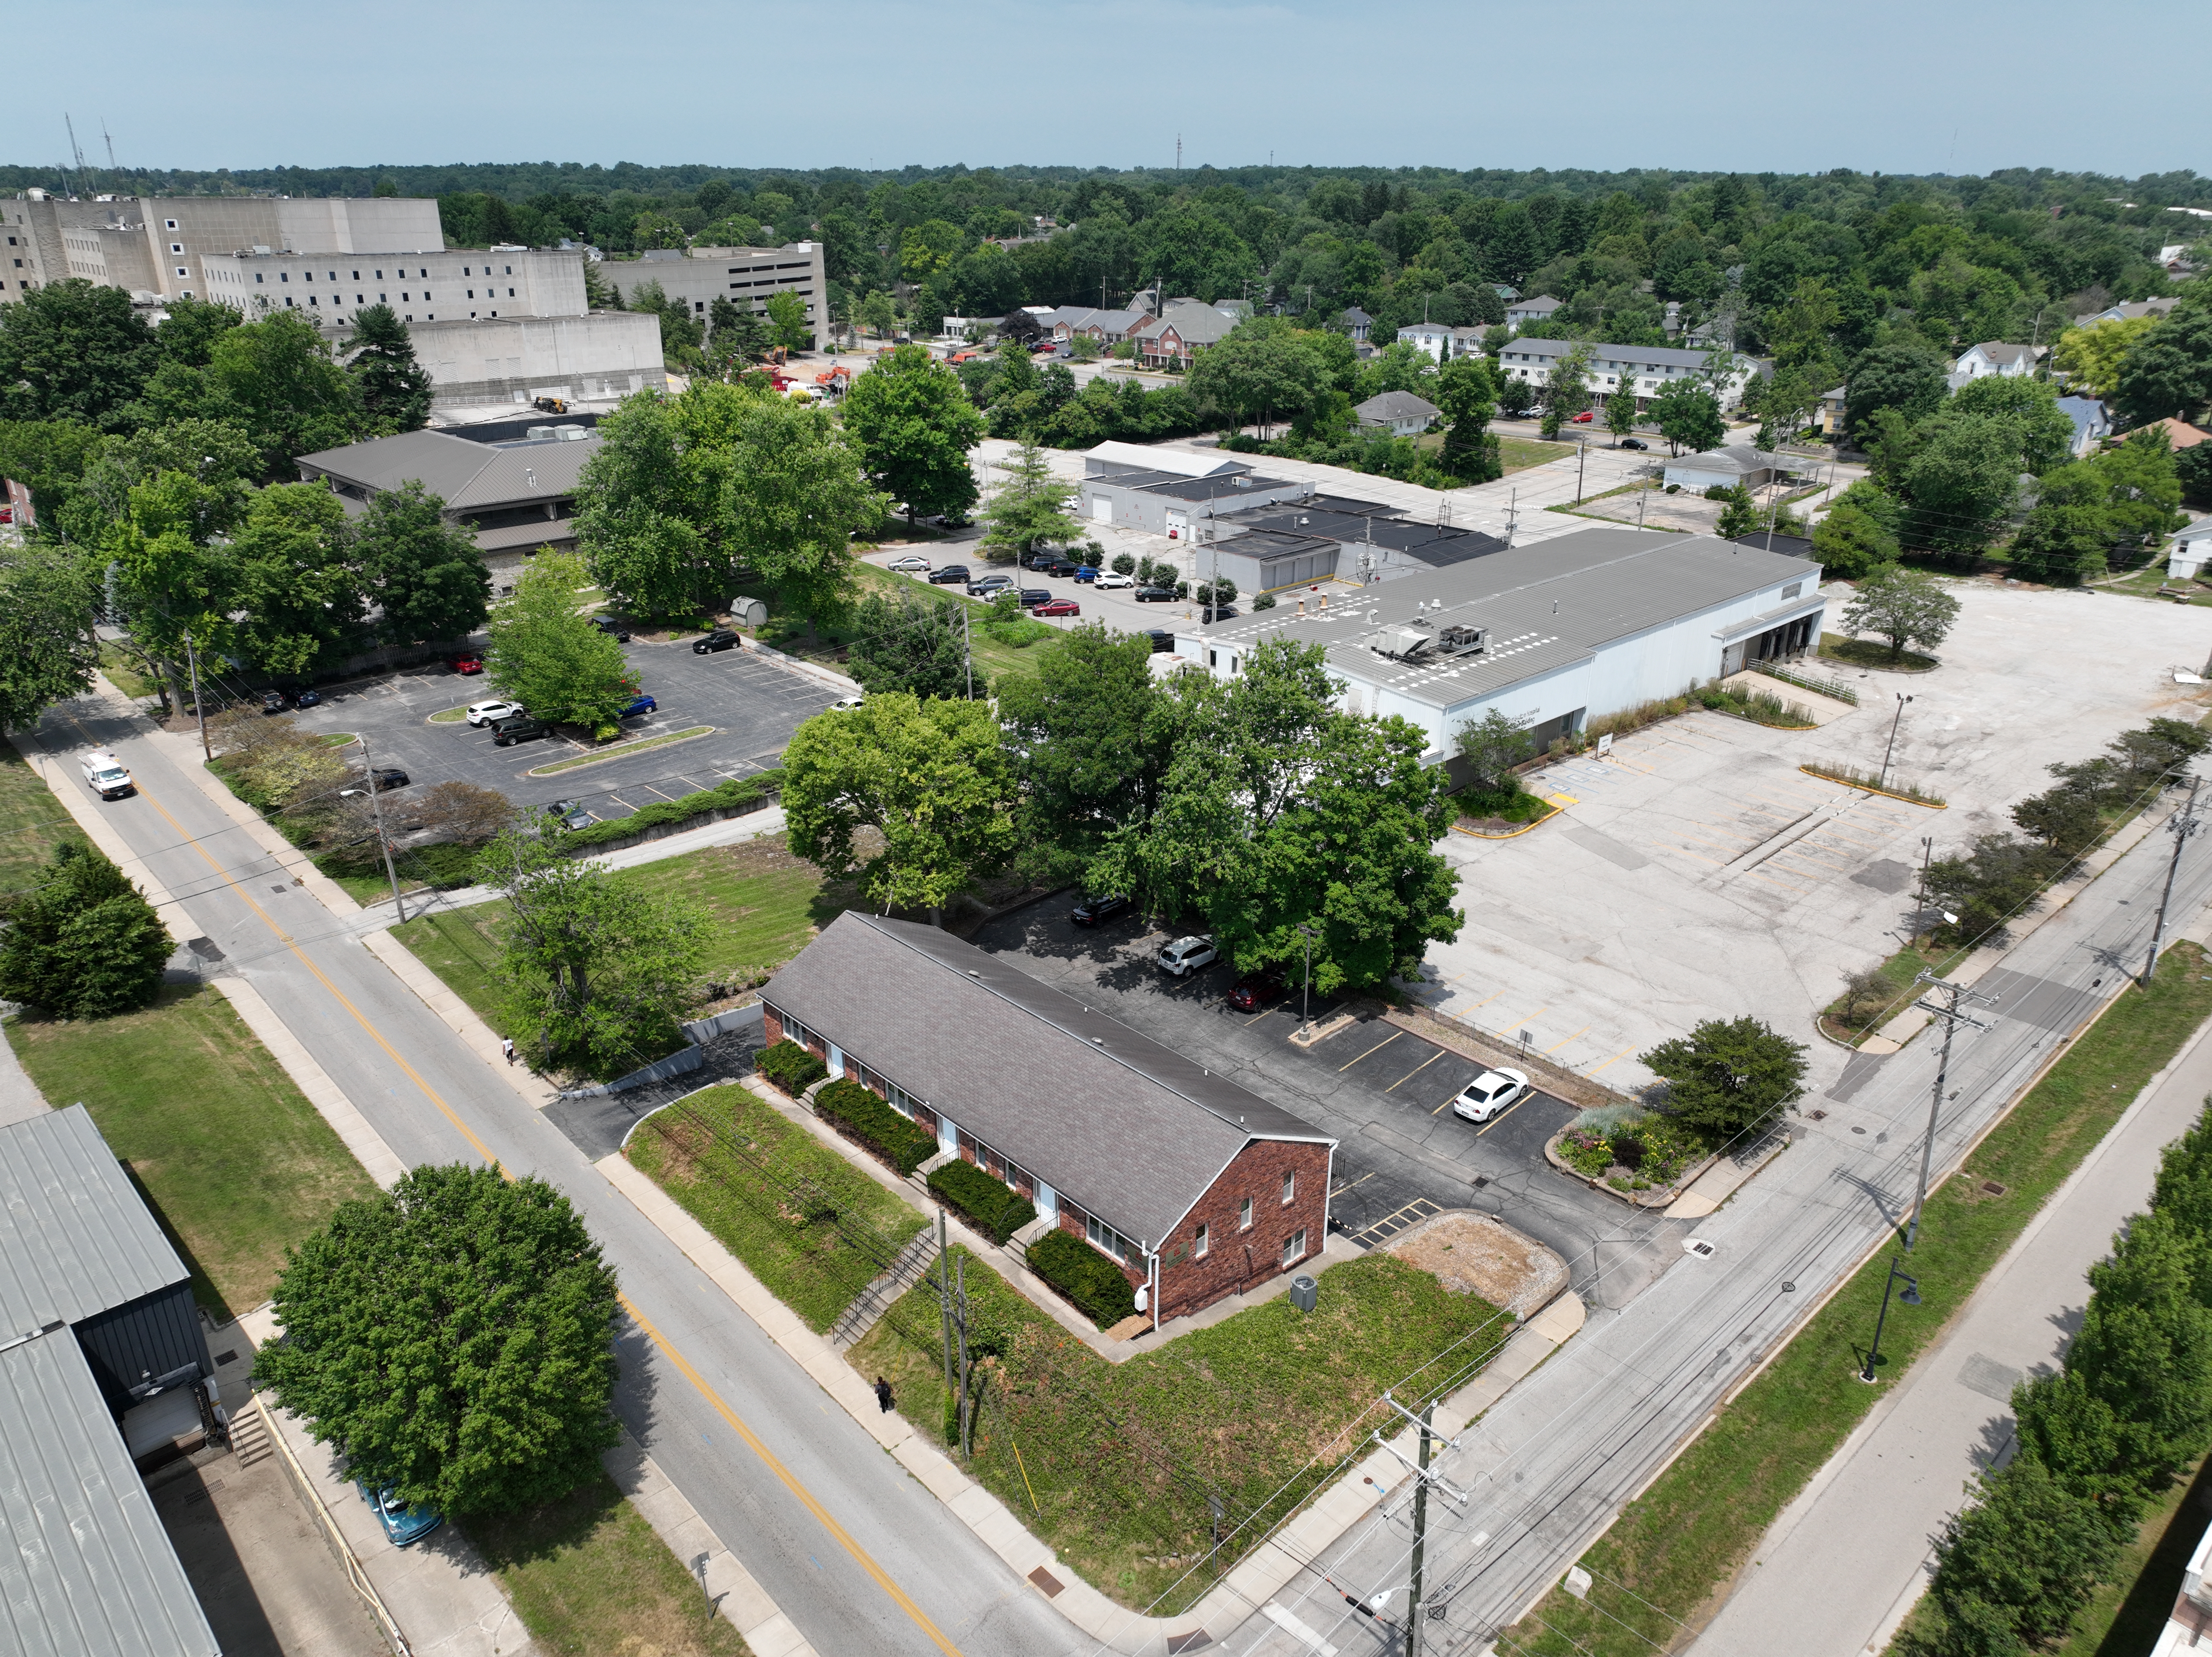 Aerial drone photo showing the development site prior to demolition. The left photo looks southwest from the intersection of 2nd and Morton Street, showing residential houses in the foreground with warehouses behind and the legacy hospital in the background. 